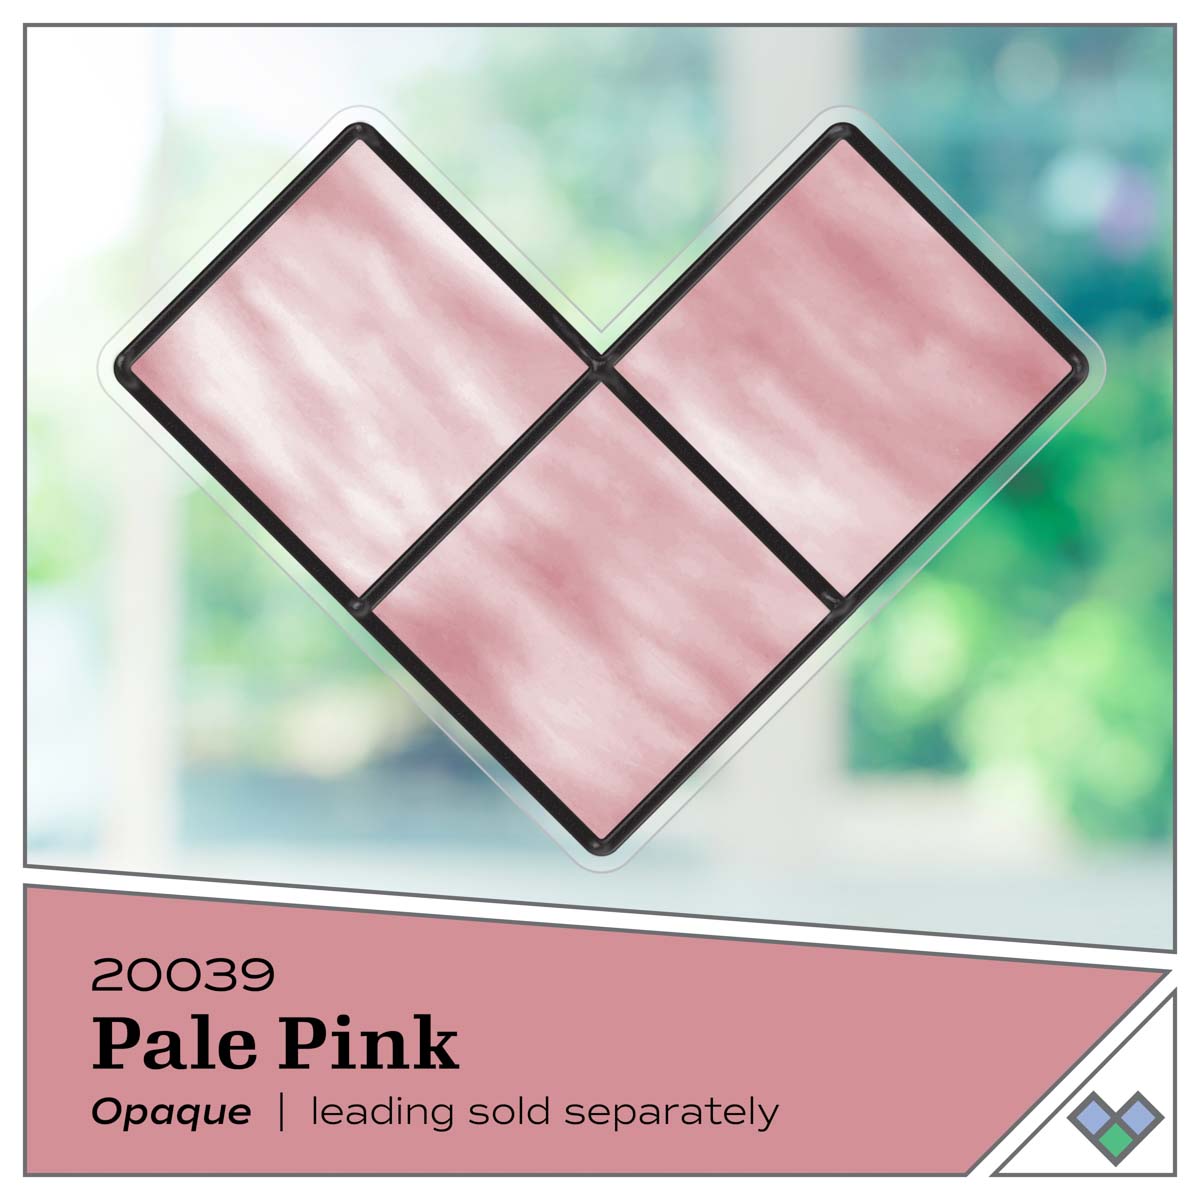 Gallery Glass ® Stained Glass Effect Paint - Pale Pink, 2 oz. - 20039